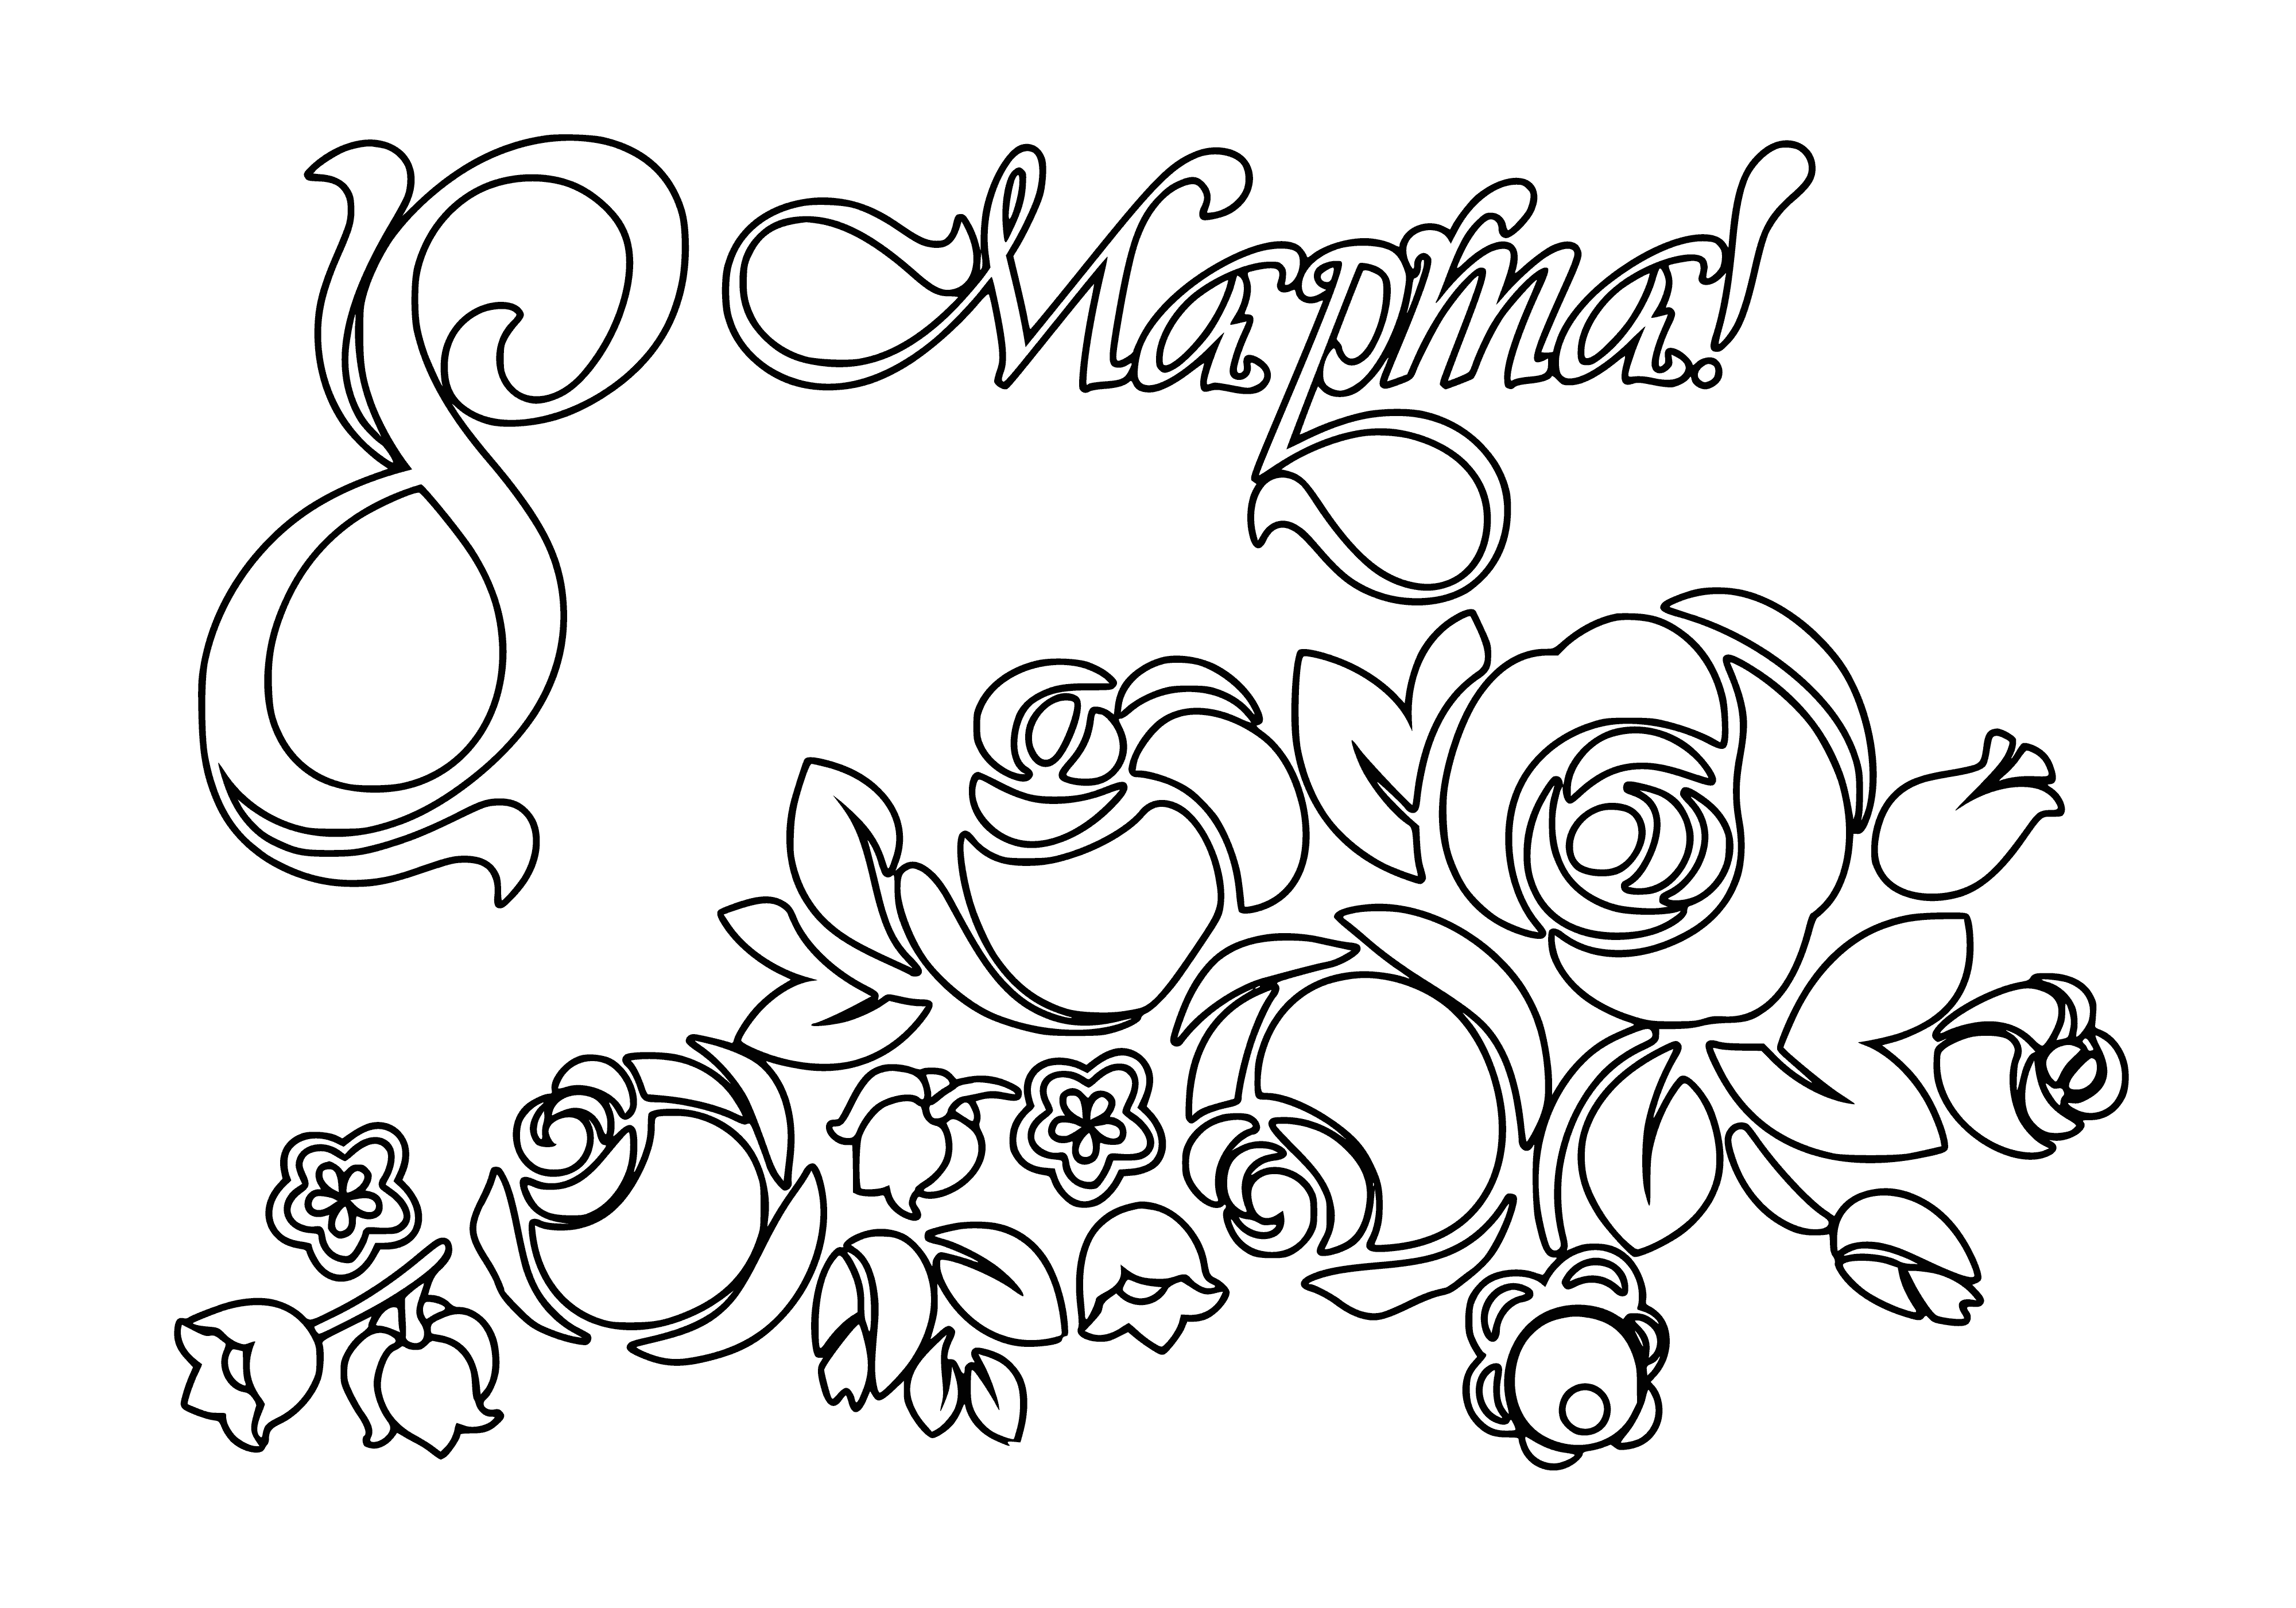 coloring page: Group of women of all ages in a field, fists raised, singing for International Women's Day. Banner reading "International Women's Day" in sky above them.